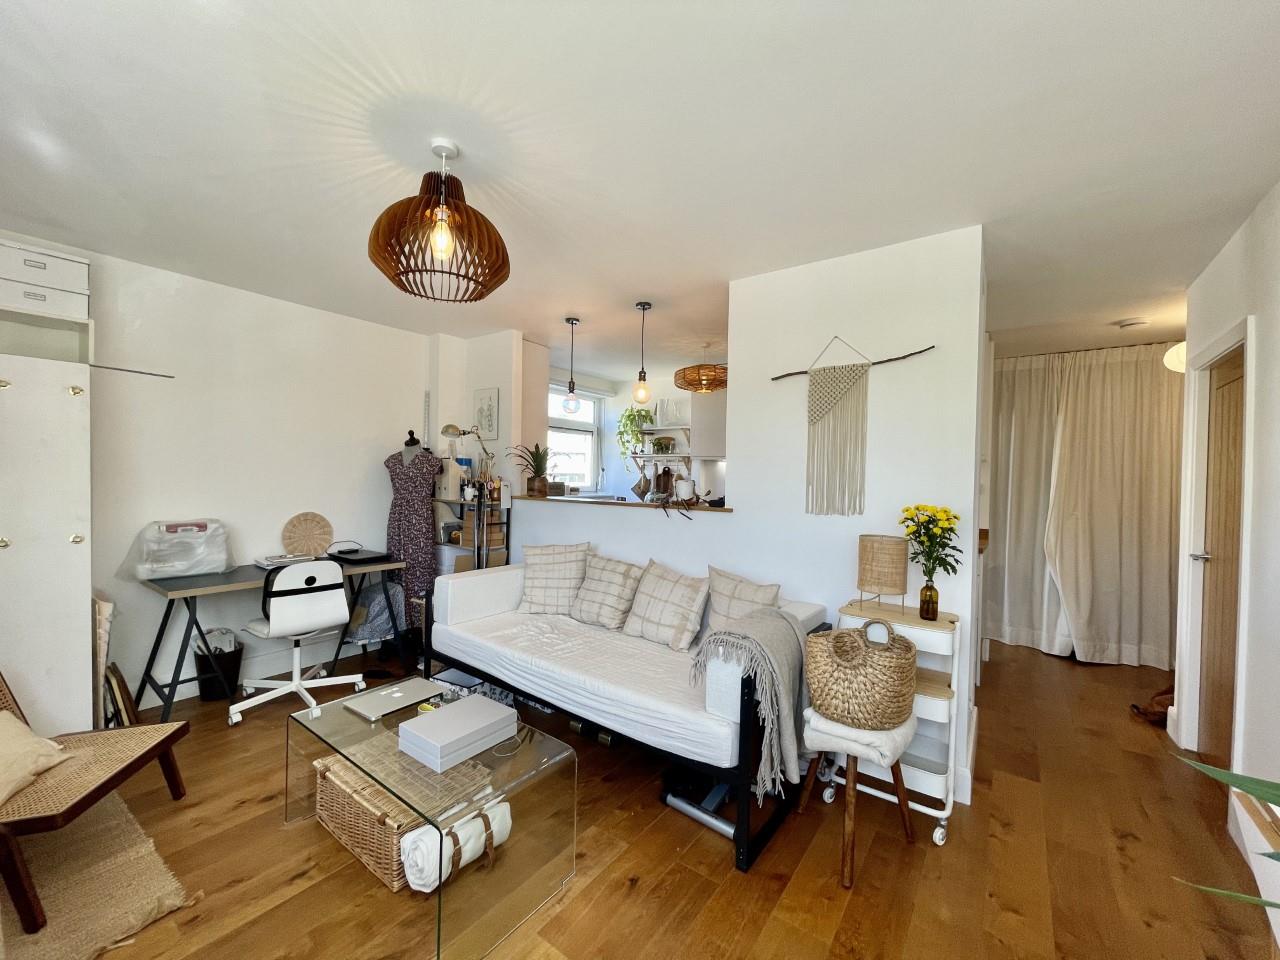 AVAILABLE 24TH JUNE 2022 (POSSIBLY EARLIER) . A contemporary designed second floor flat with private balcony moments from The Roundhouse Venue and the famous Camden Market. The accommodation comprises of a double bedroom (with built in wardrobes), living room, modern bathroom, separate modern ...